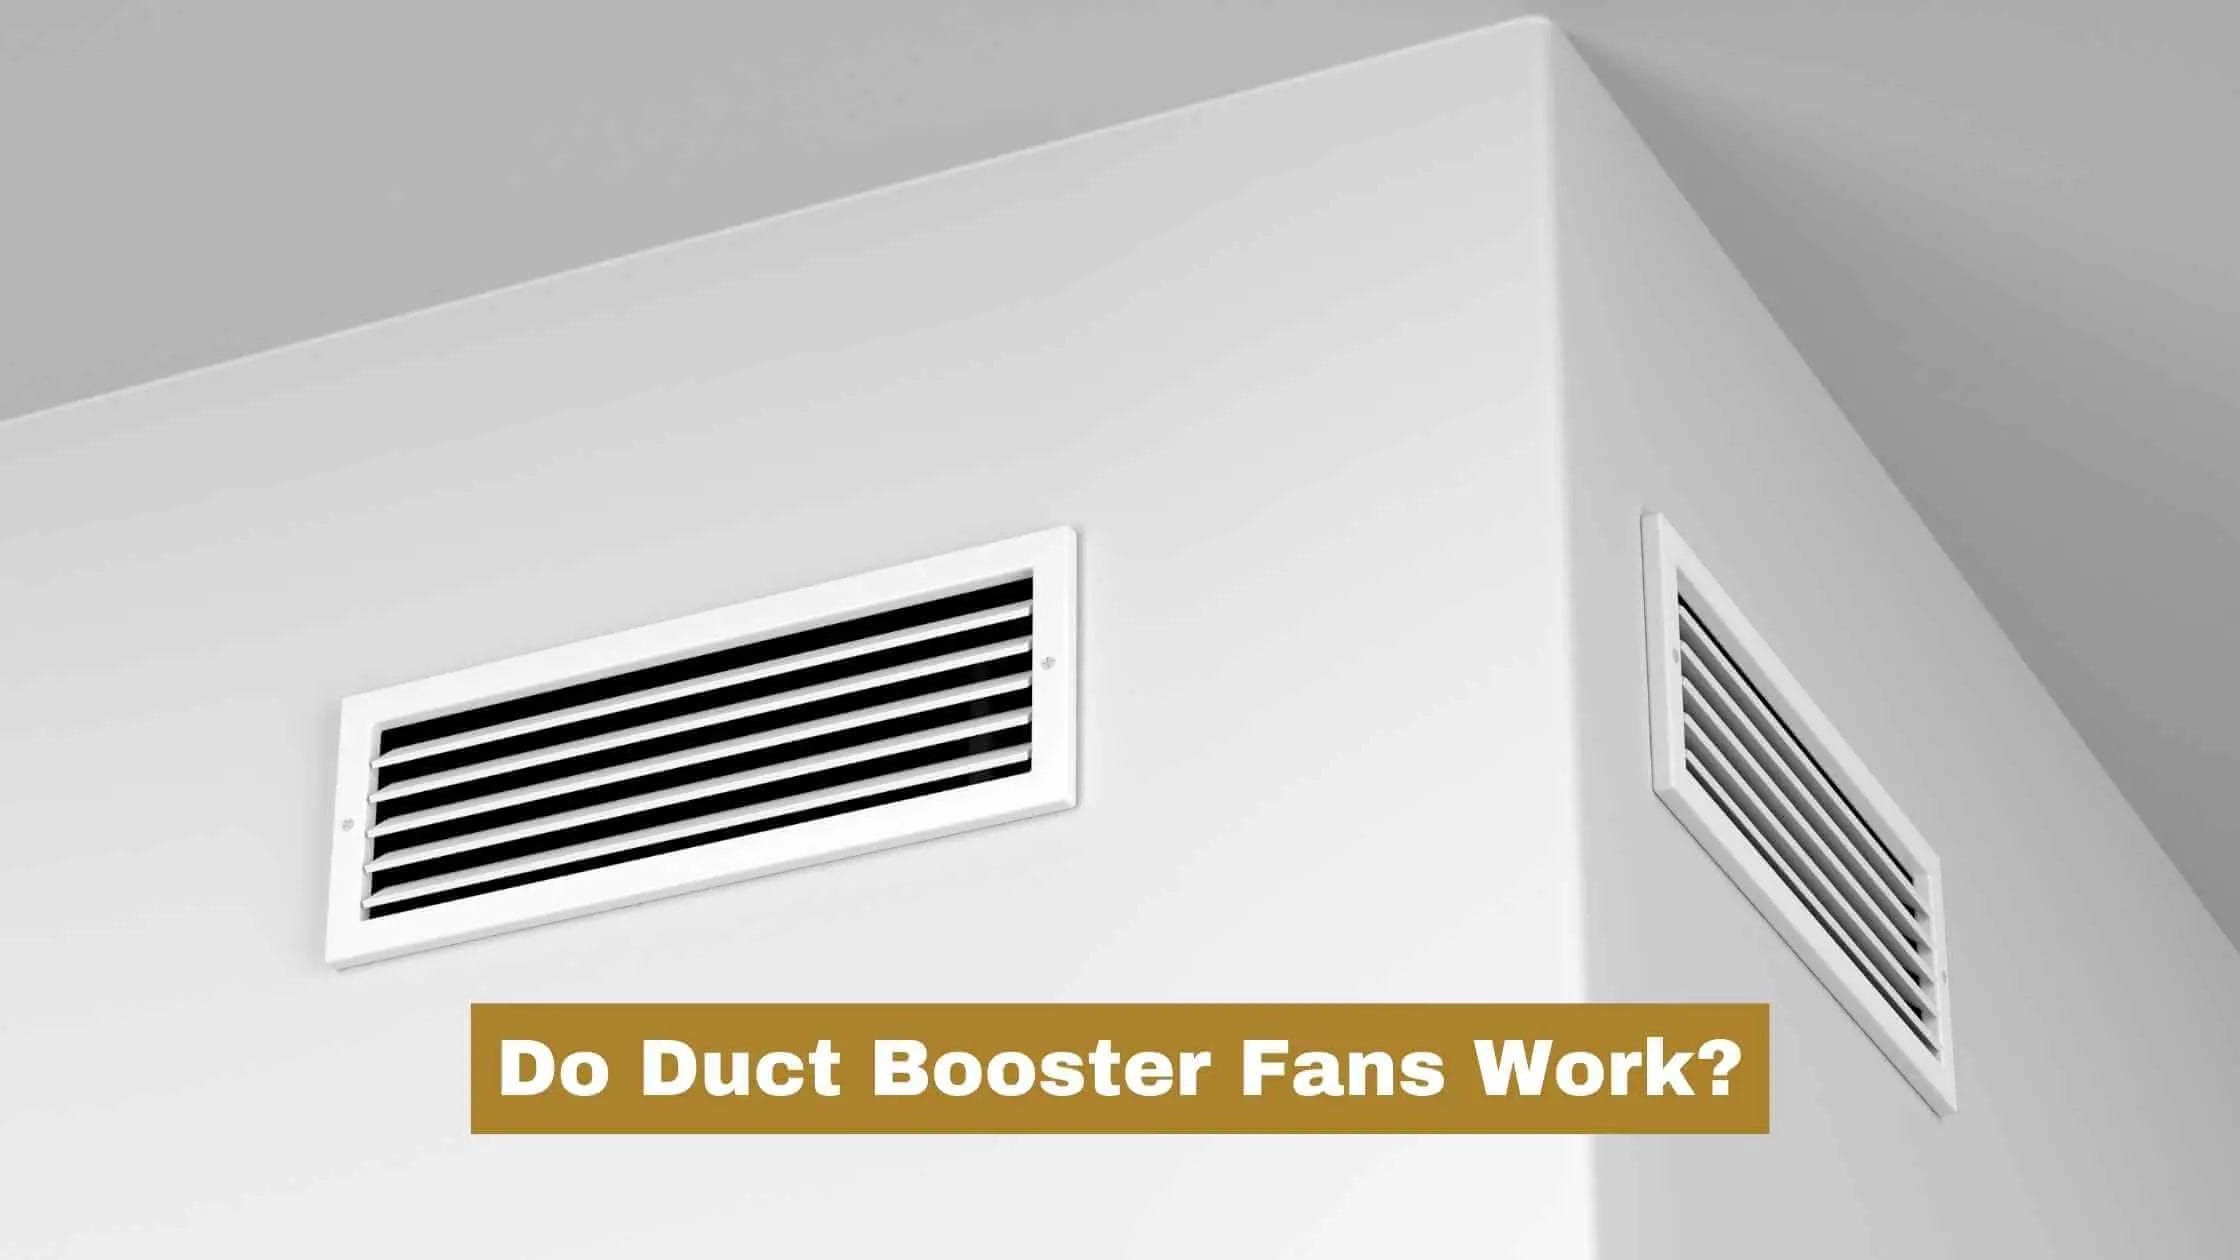 Do Duct Booster Fans Work